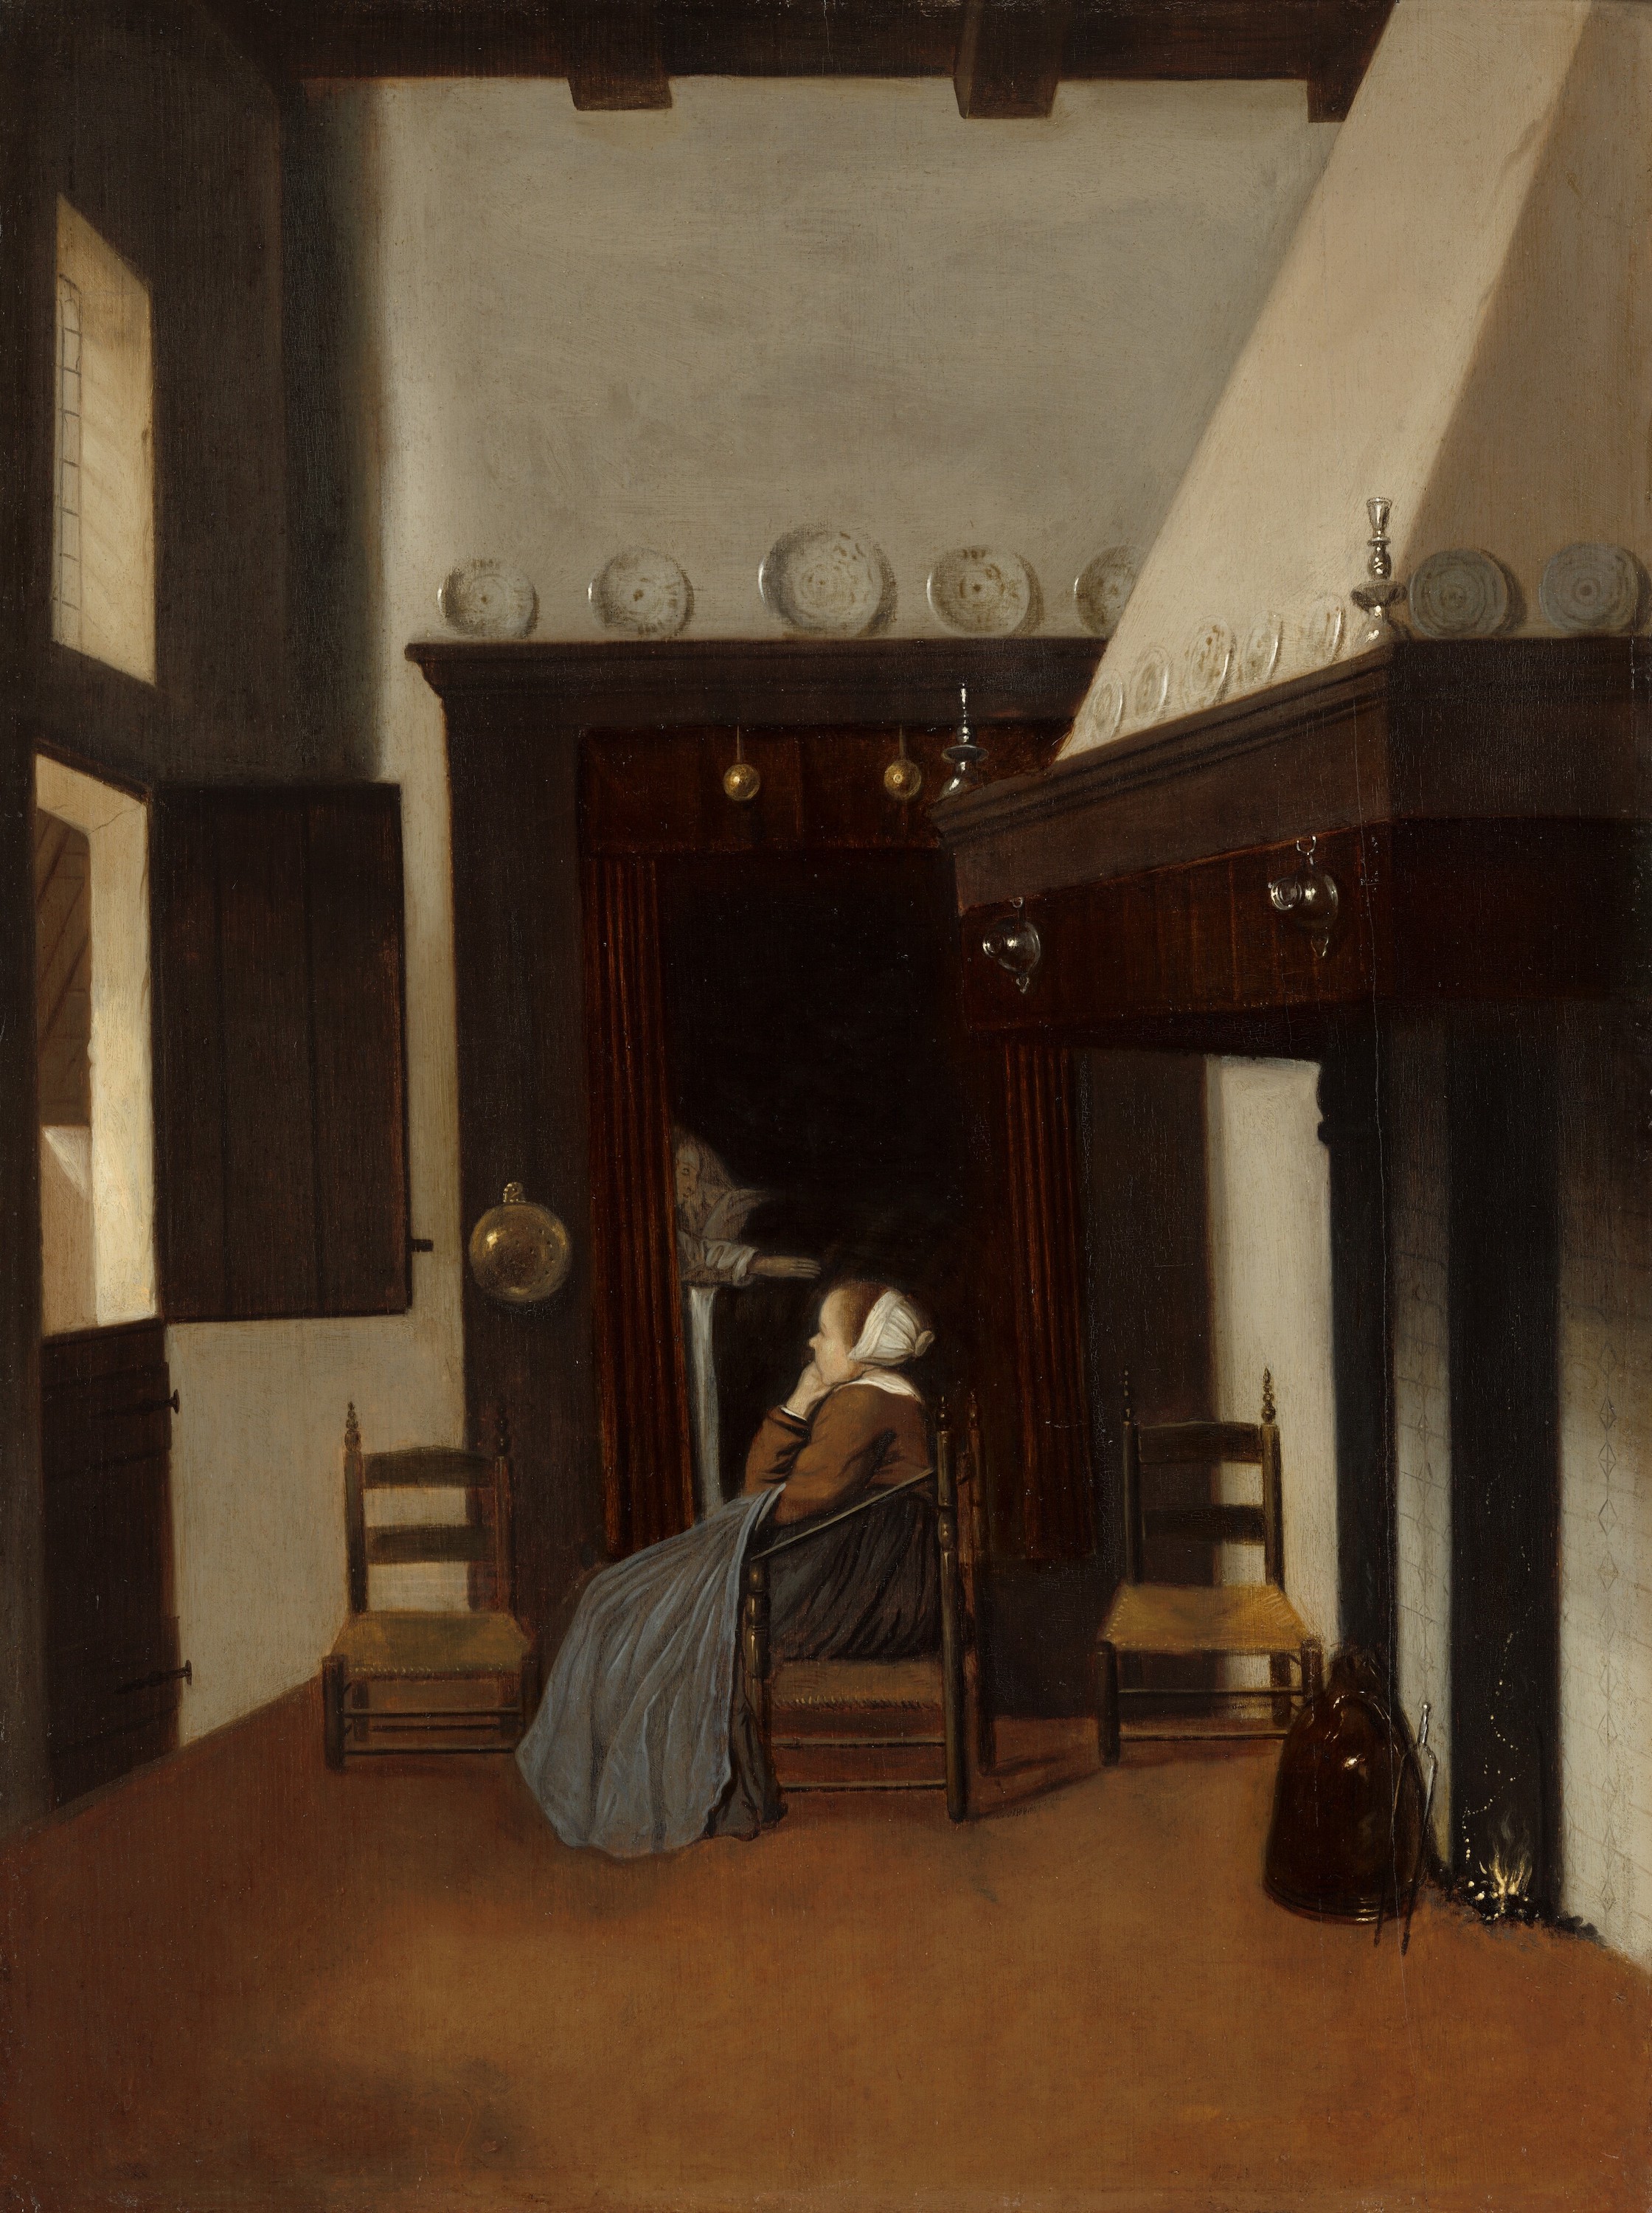 Young Woman in an Interior by Jacobus Vrel - c. 1660 - 55.7 × 41.3 cm National Gallery of Art